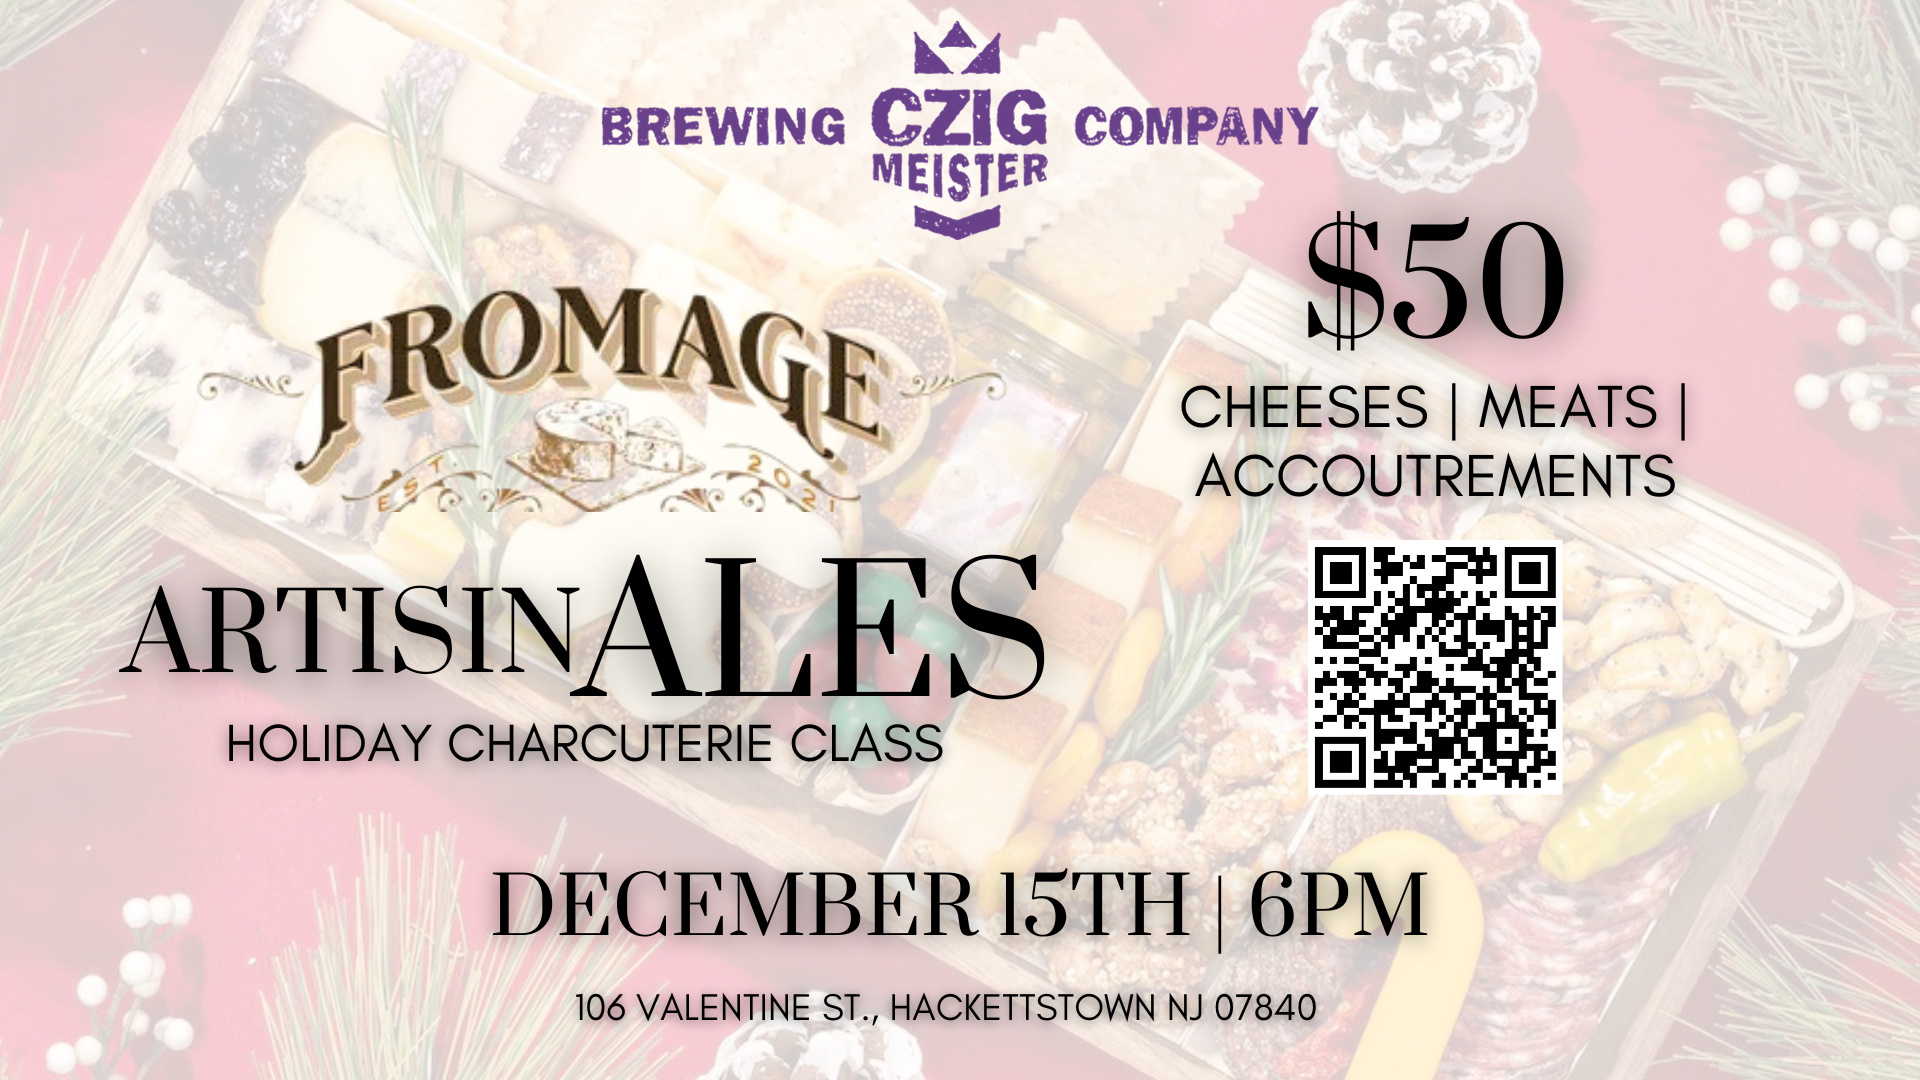 ArtisinALES Holiday Charcuterie Class by Fromage Hackettstown at Czig Meister Brewing Company